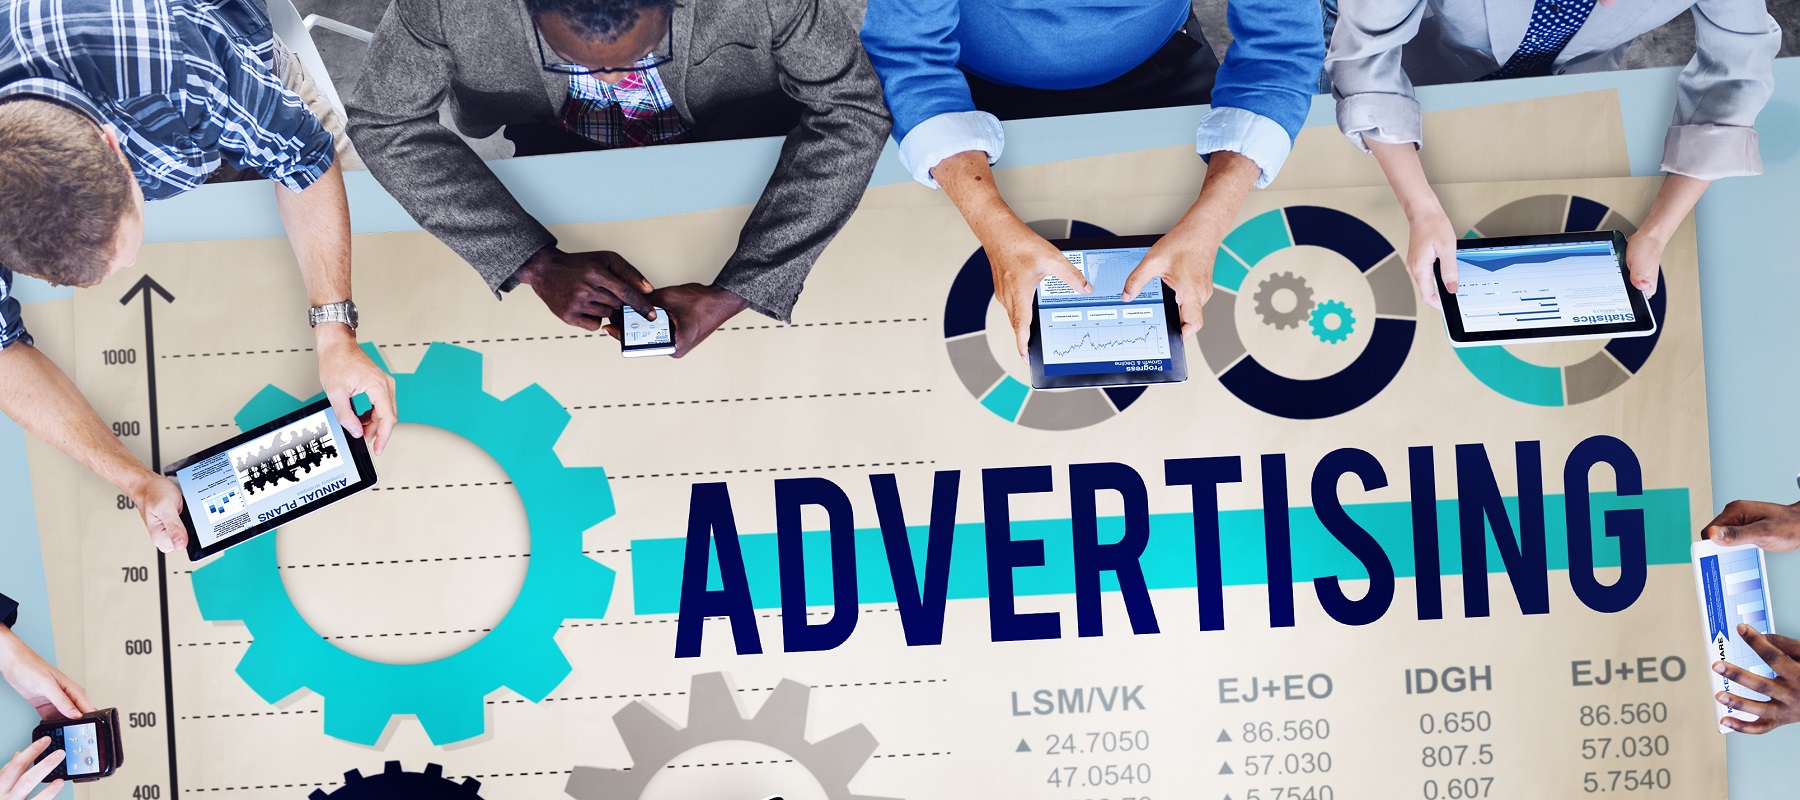 [South Africa] Advertising spend to grow over 6.1% next year, WARC study